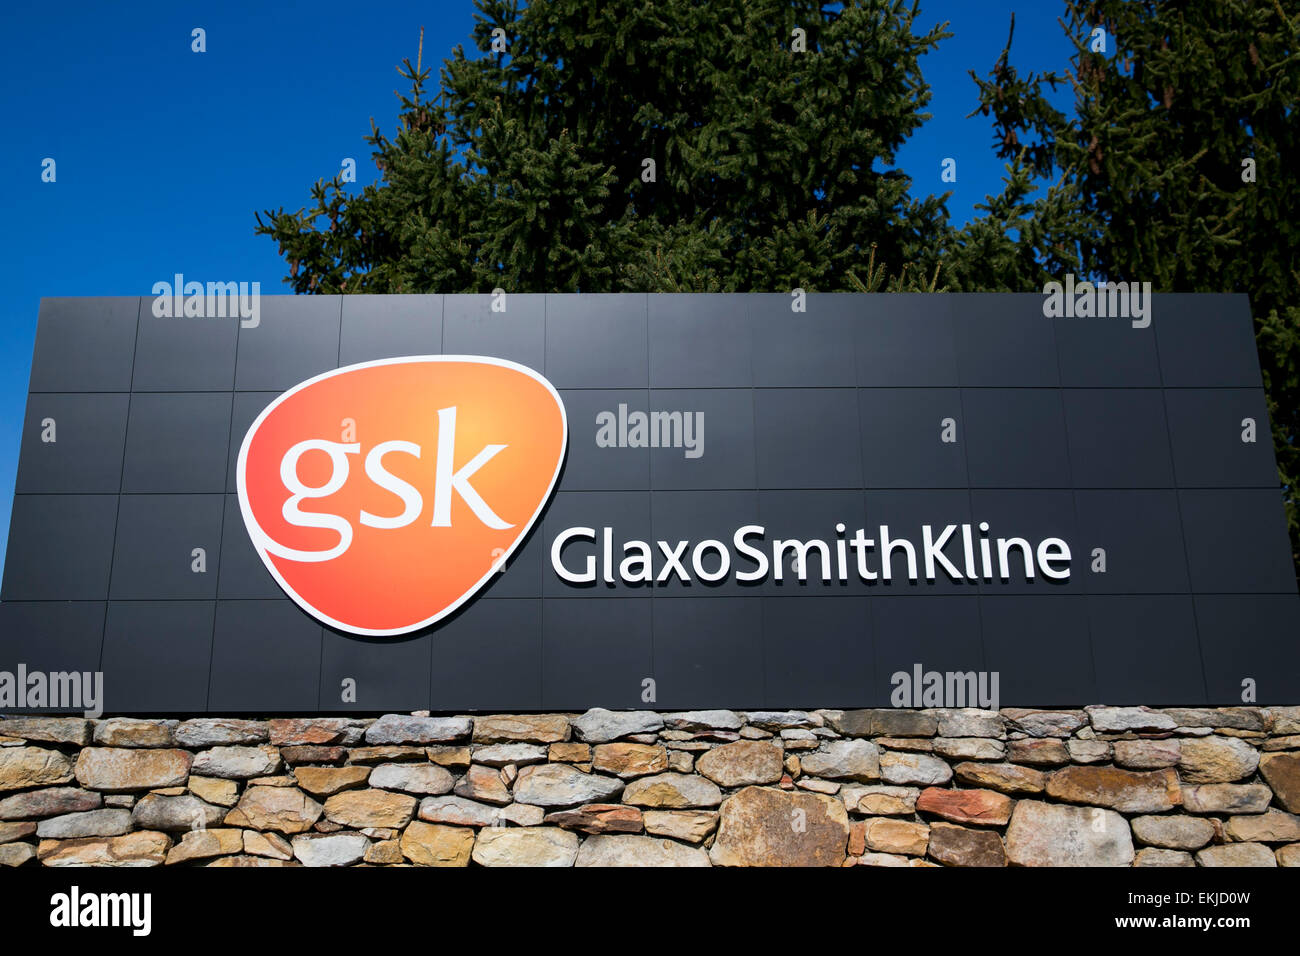 A facility operated by the pharmaceutical firm GlaxoSmithKline. Stock Photo